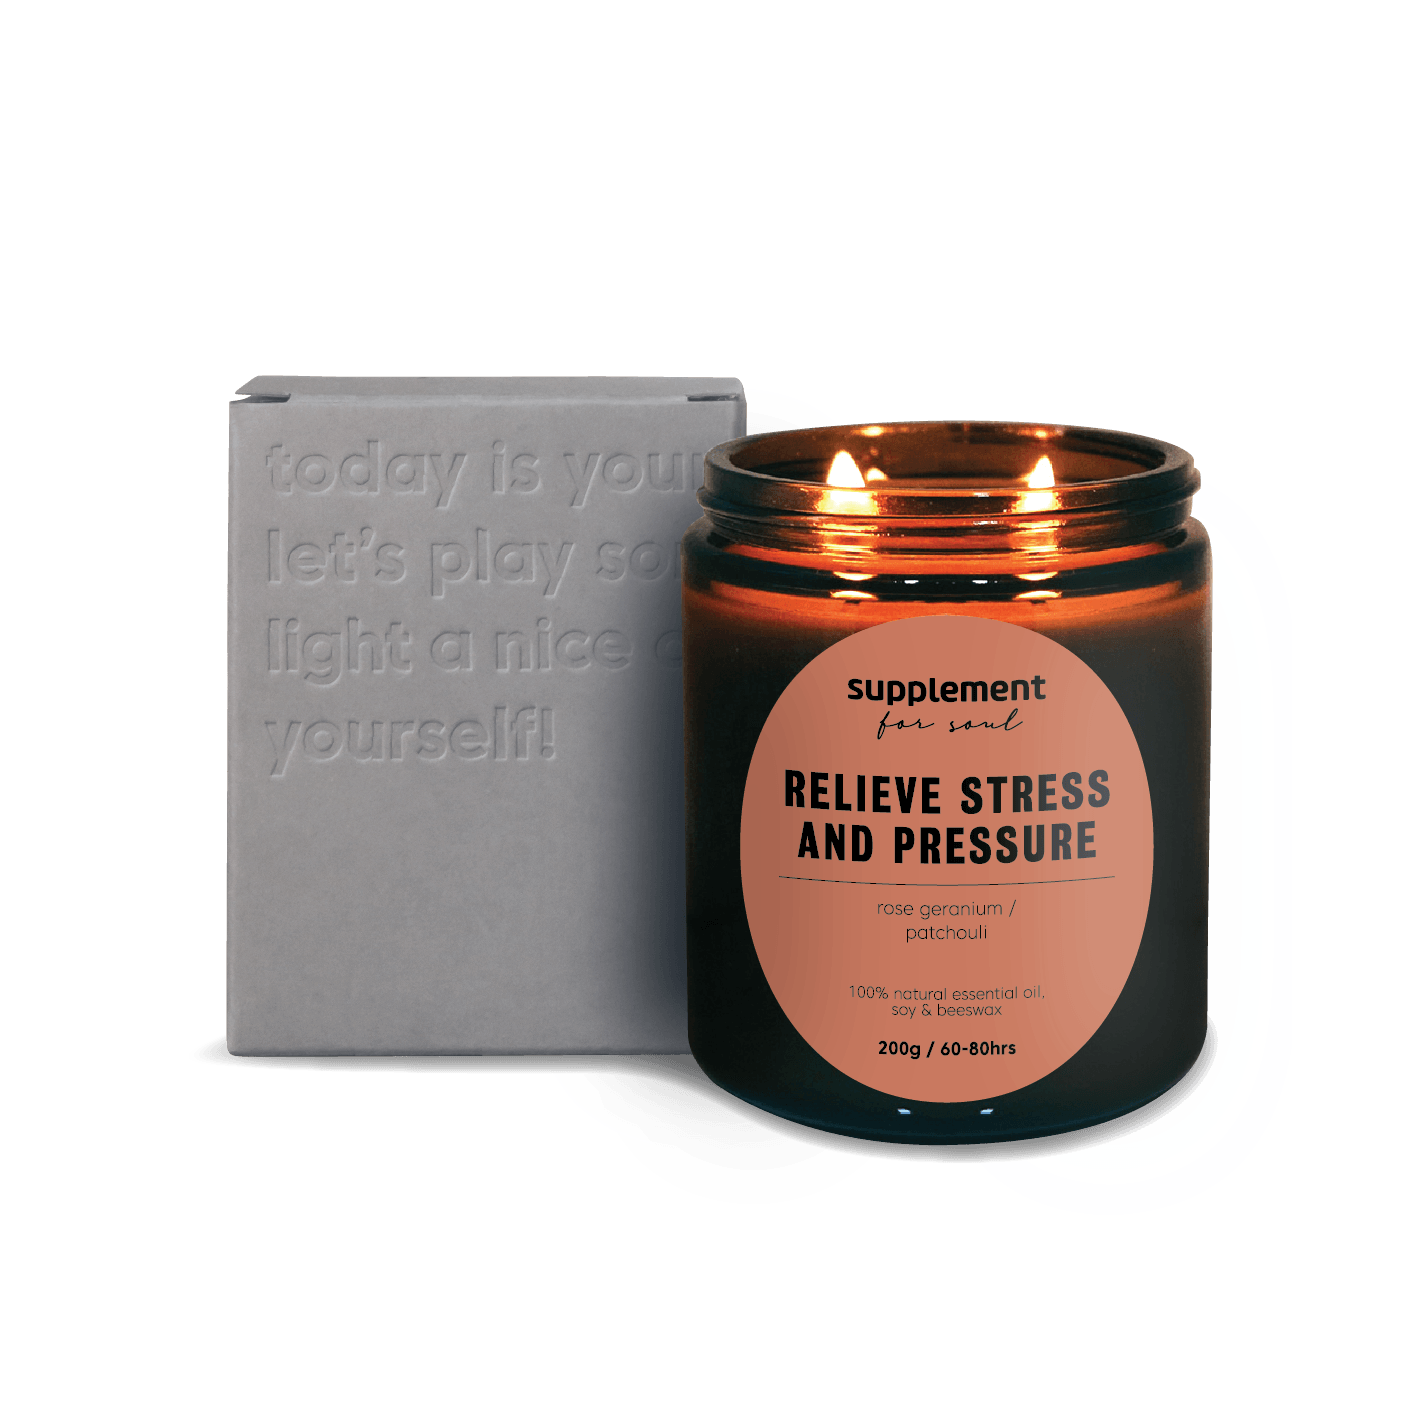 no.6 - relieve stress and pressure - supplement for soul